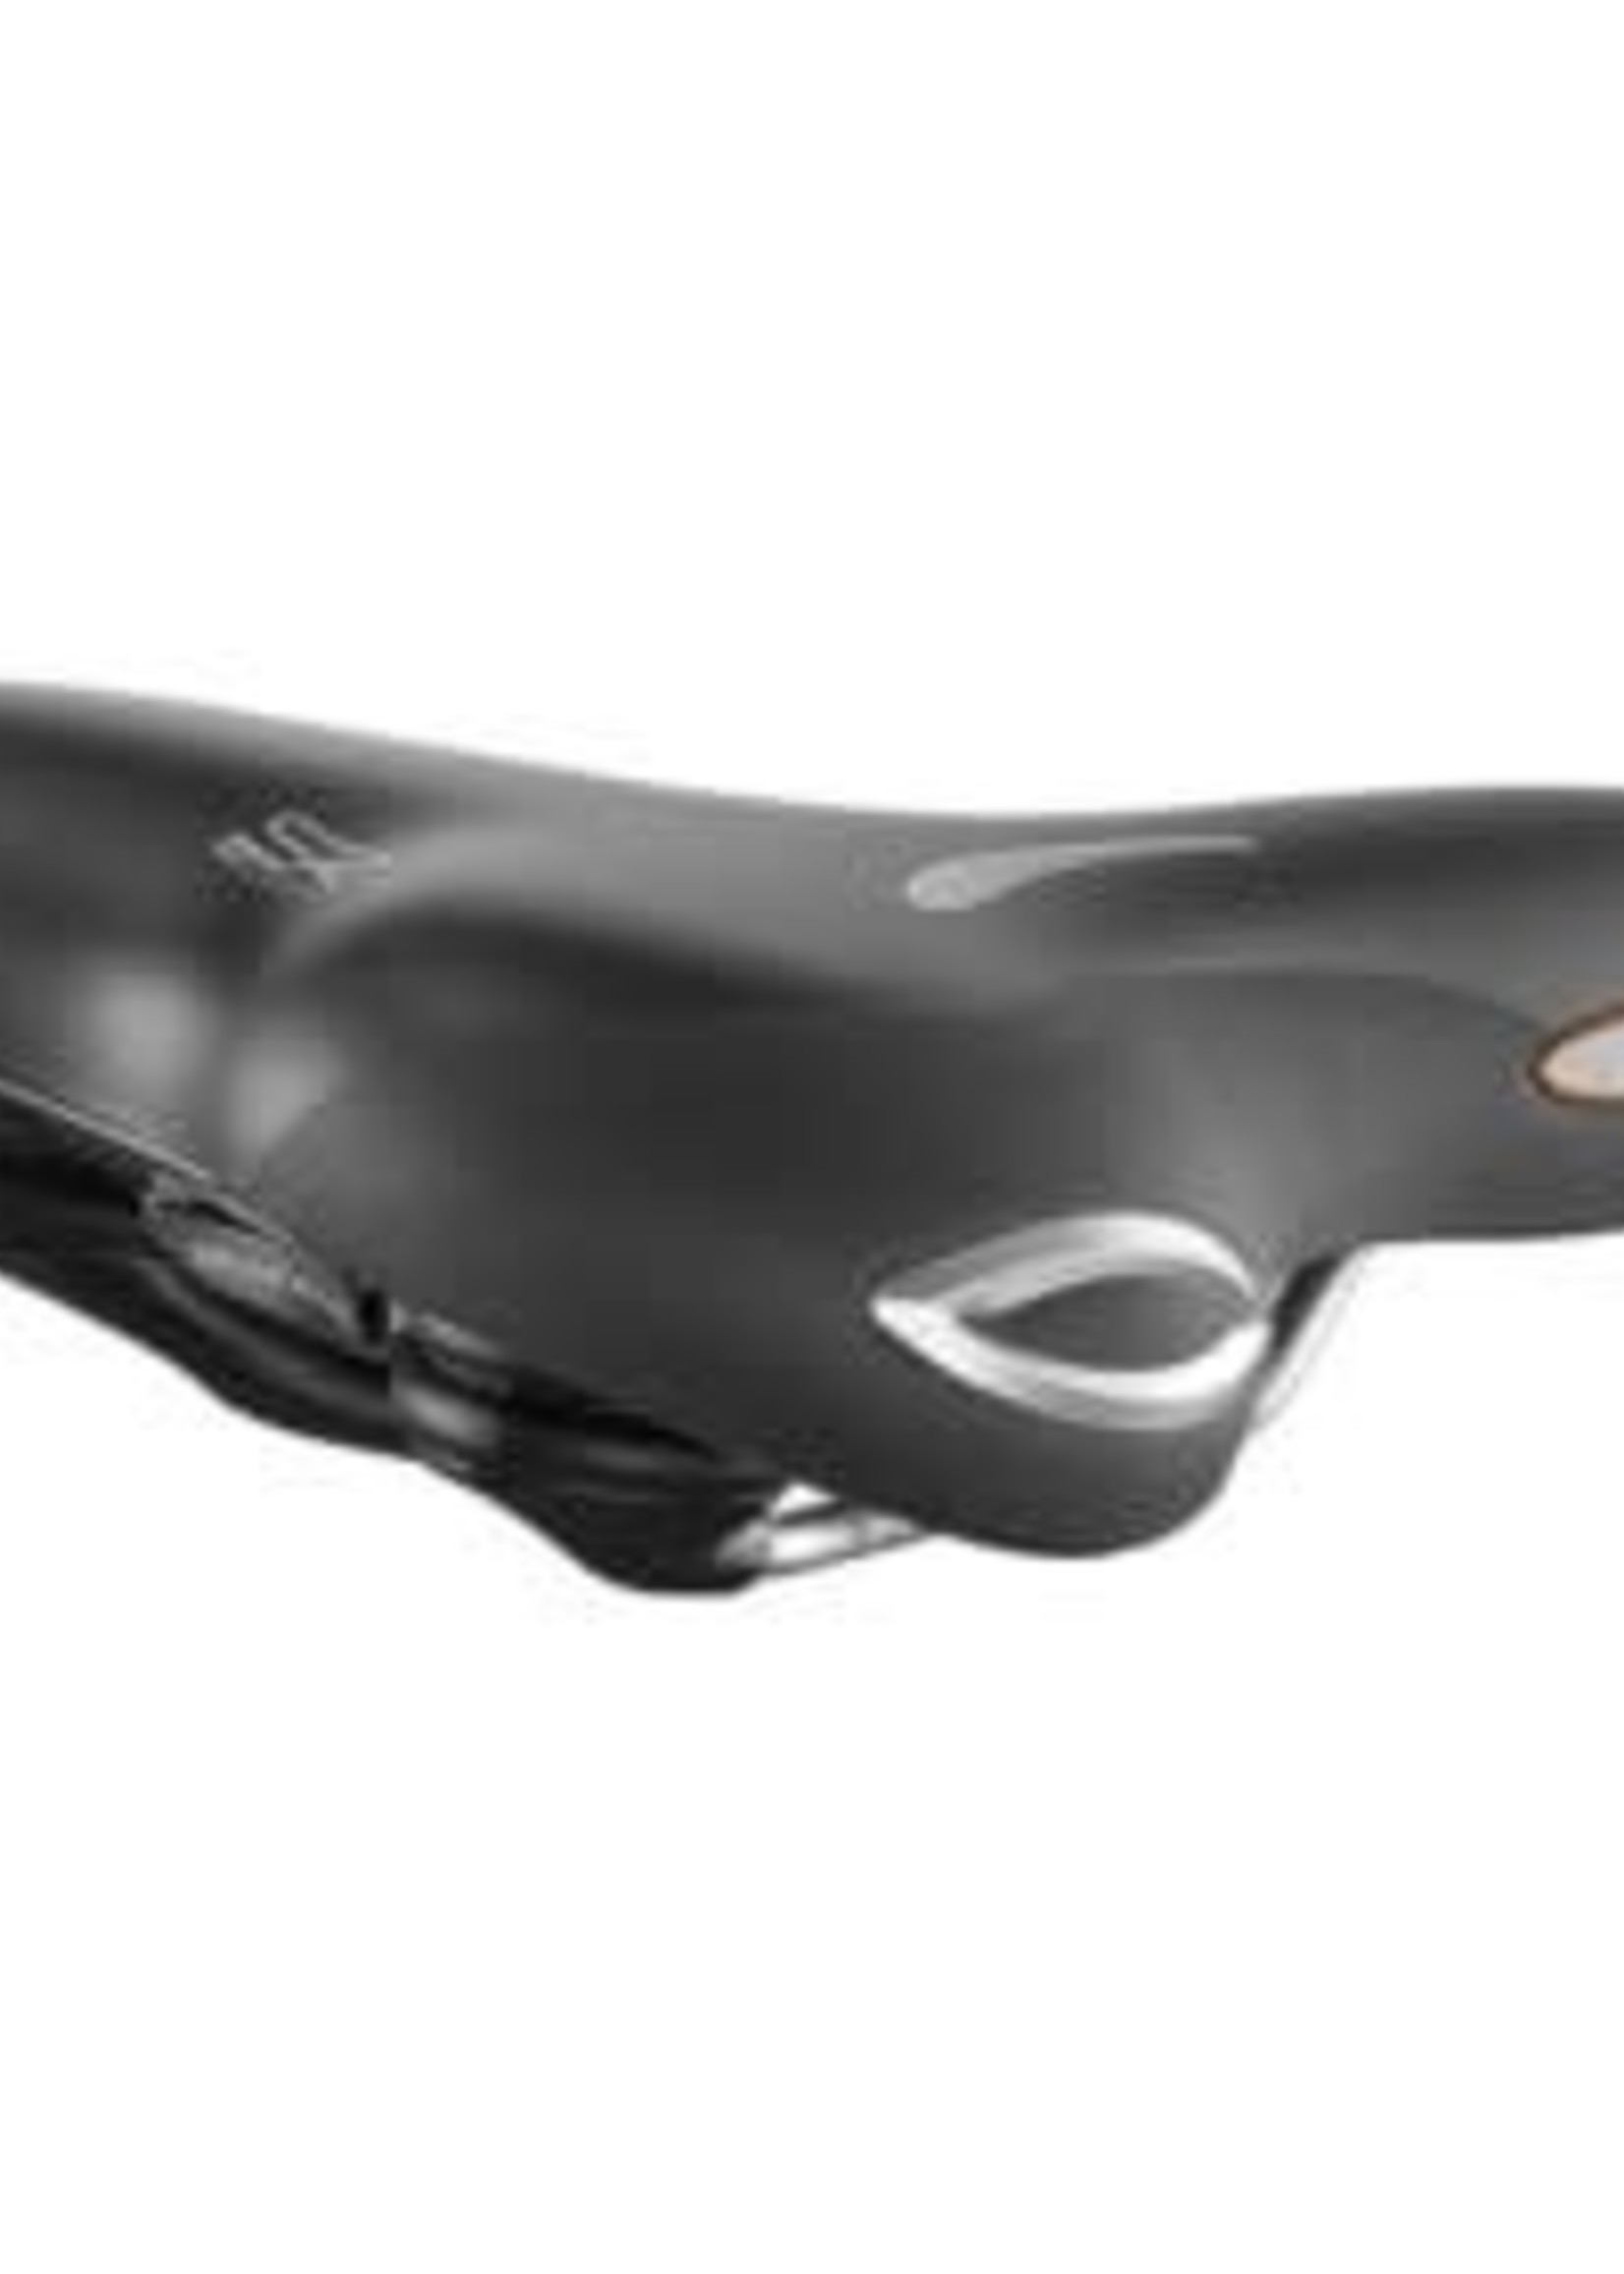 Selle Royal Selle Royal, Lookin Mderate, Saddle, 282 x 185mm, Men, 525g, Black